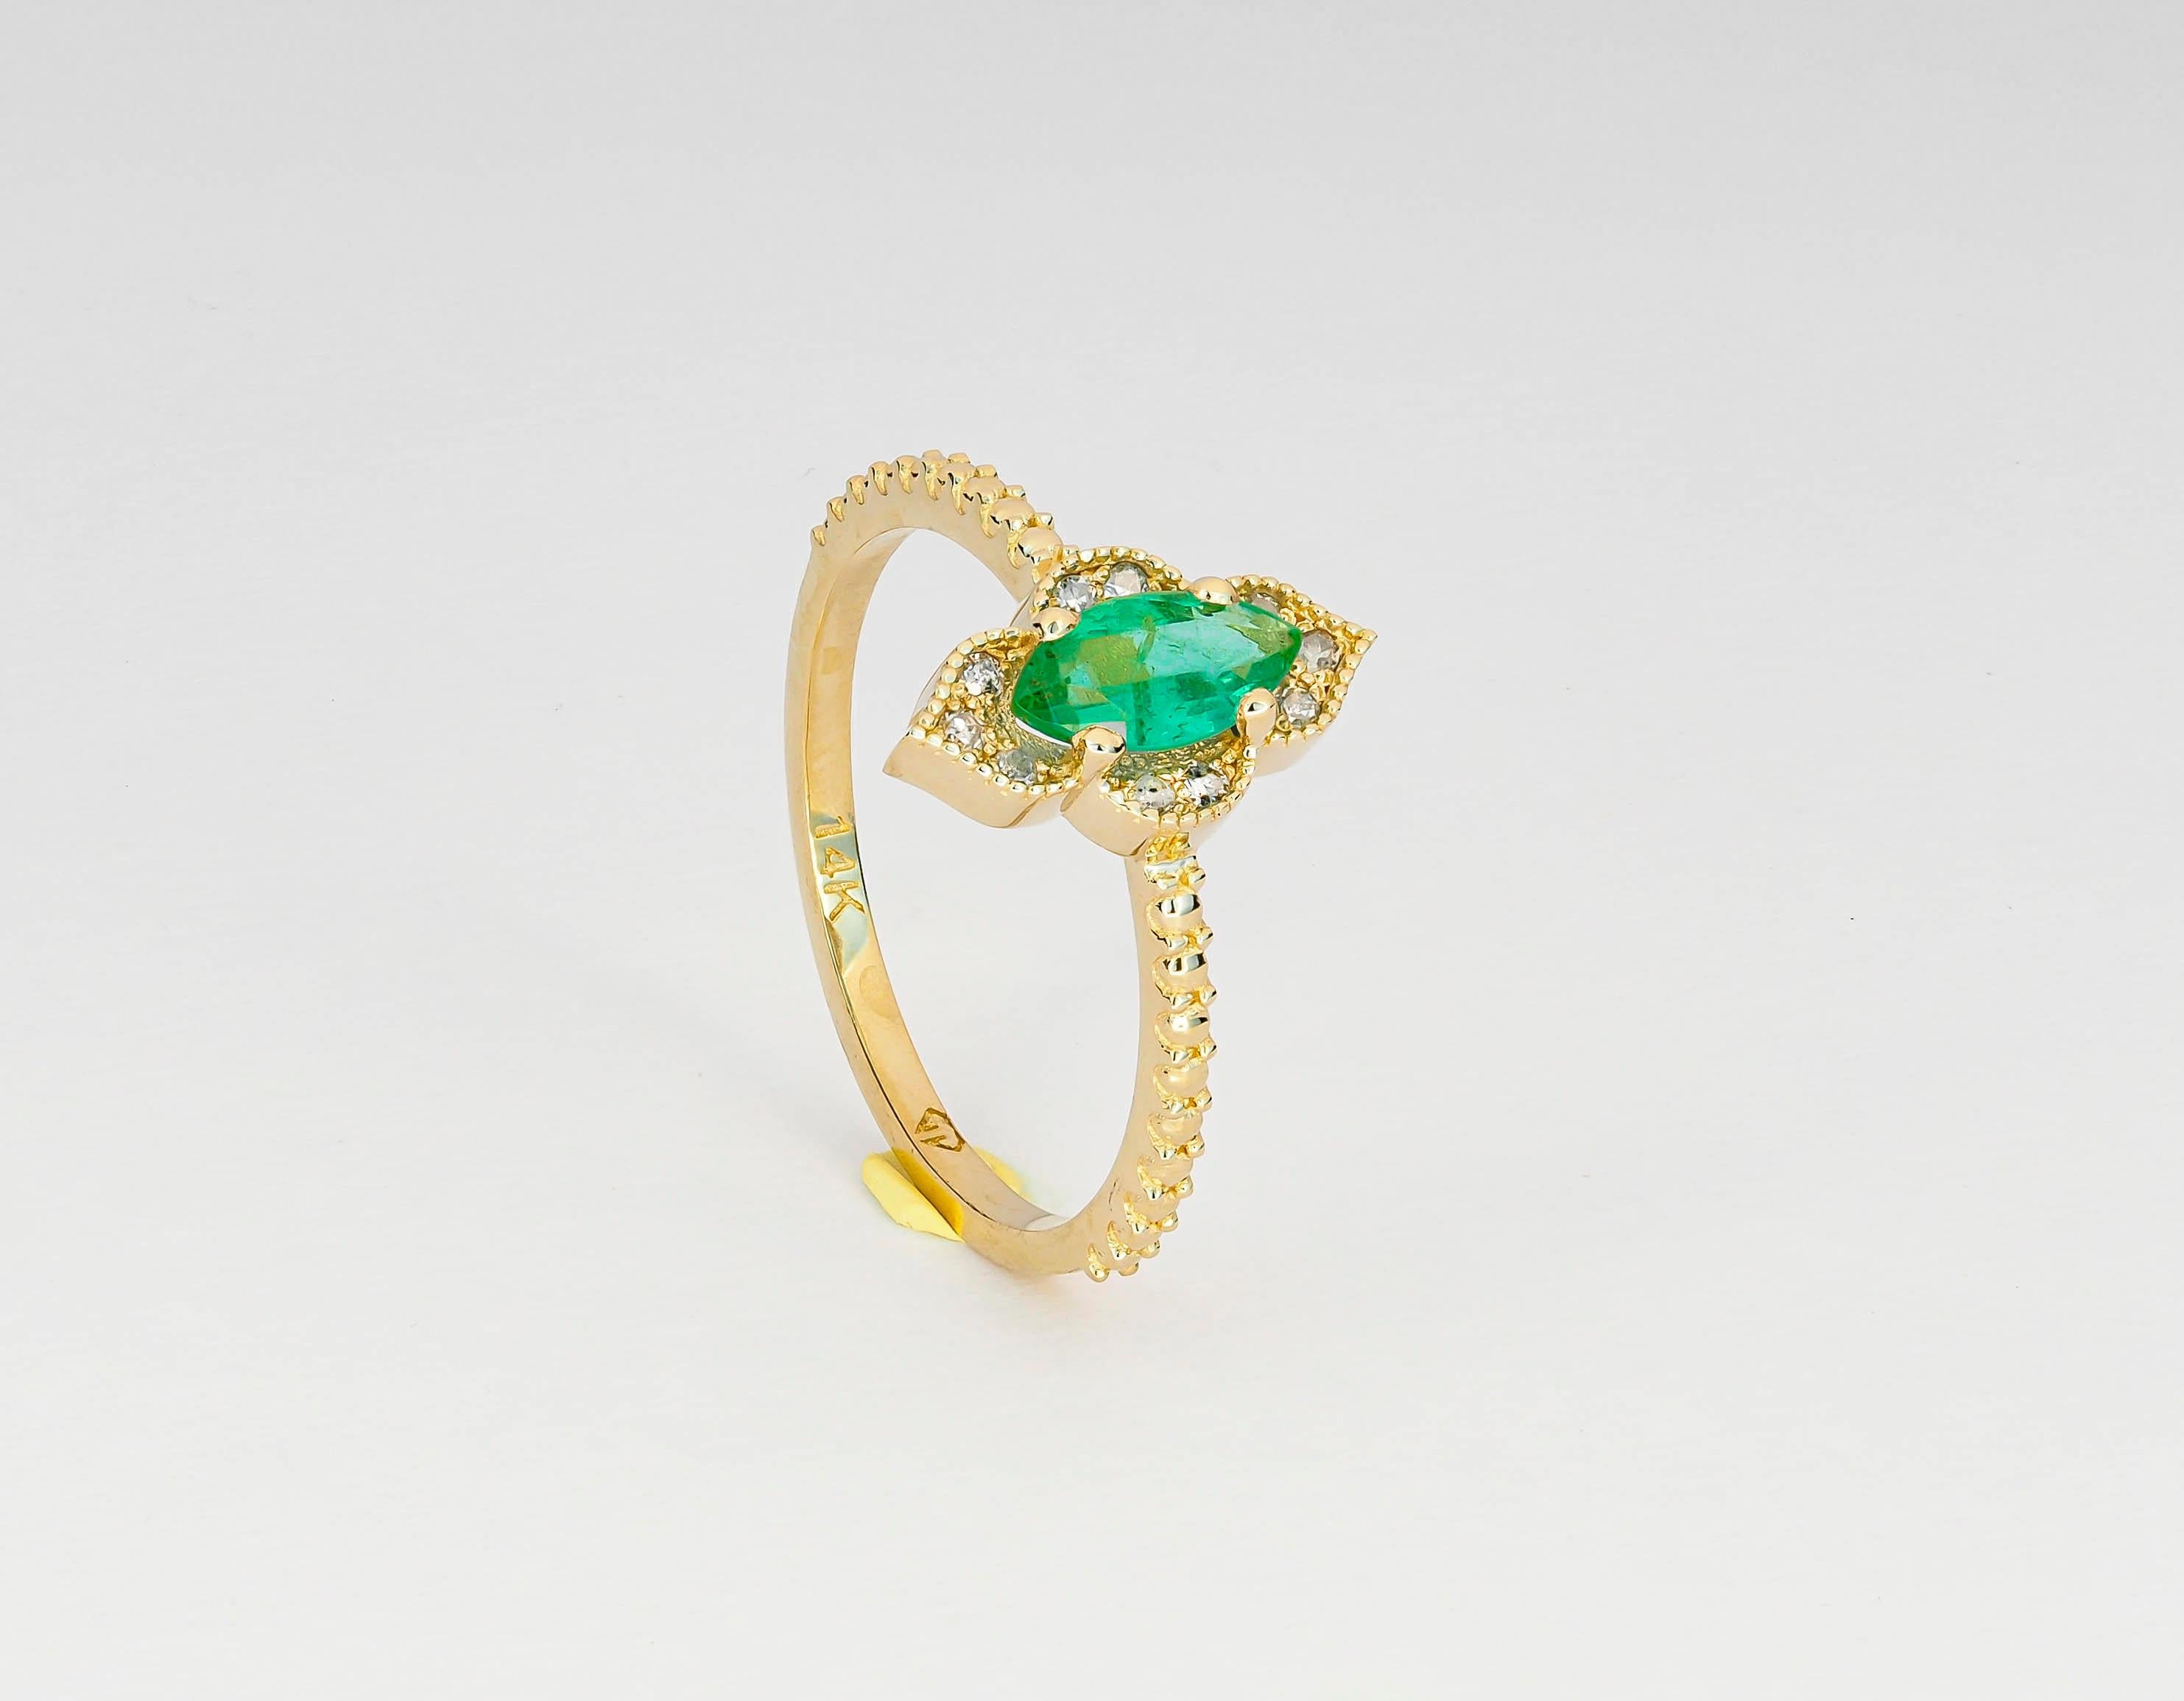 14 karat gold ring with natural emerald and diamonds. May birthstone emerald ring.
Weight approx. 2.02 g. depends from size
Central stones: Natural emerald
Marquise cut, weight - approx 0.70 ct in total.
Clarity: Transparent with inclusions, color -